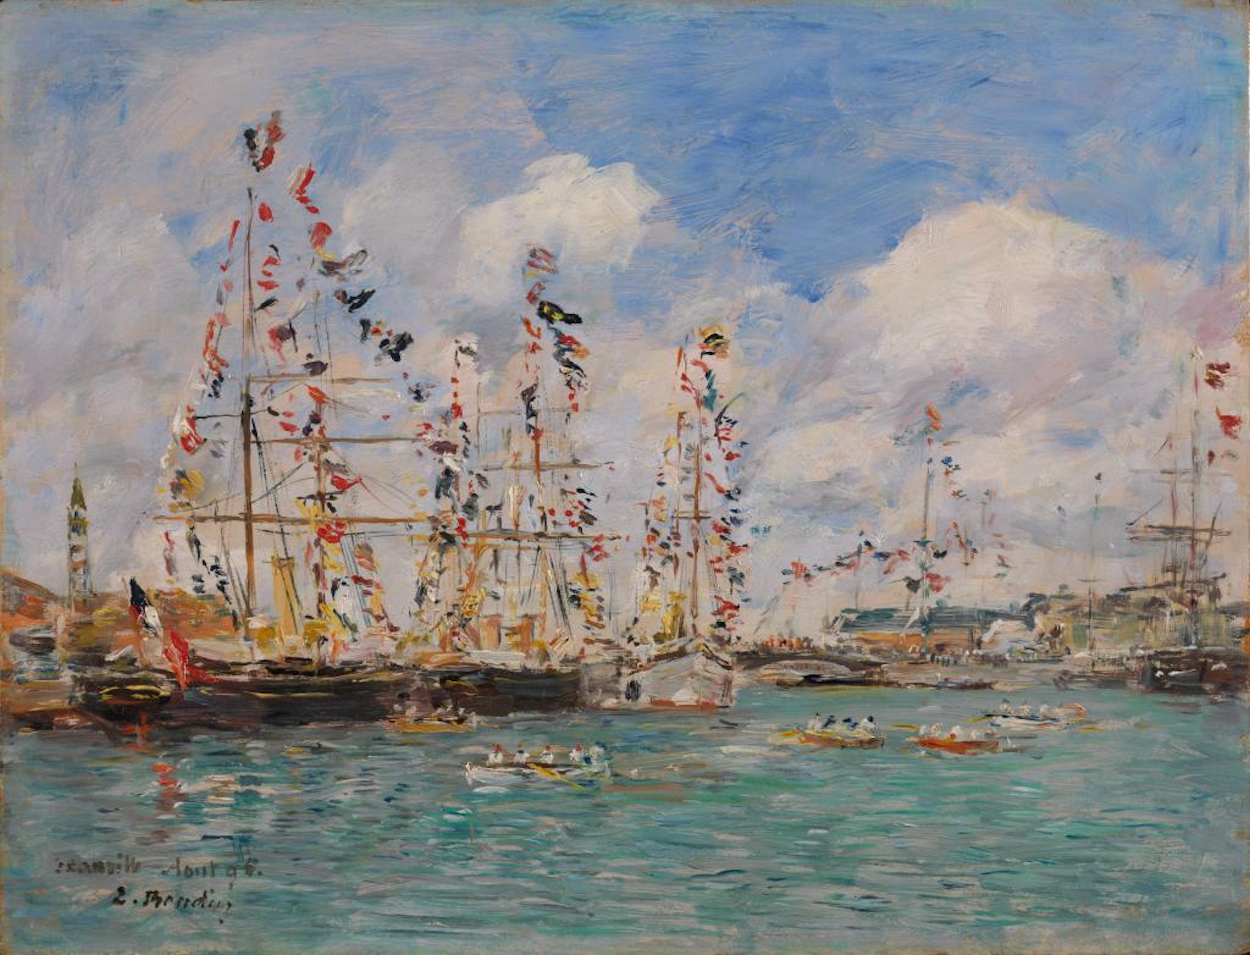 Boats Decorated with Flags in the Port of Deauville by Eugène Boudin - 1895 - 26.67 x 34.93 cm Nelson-Atkins Museum of Art